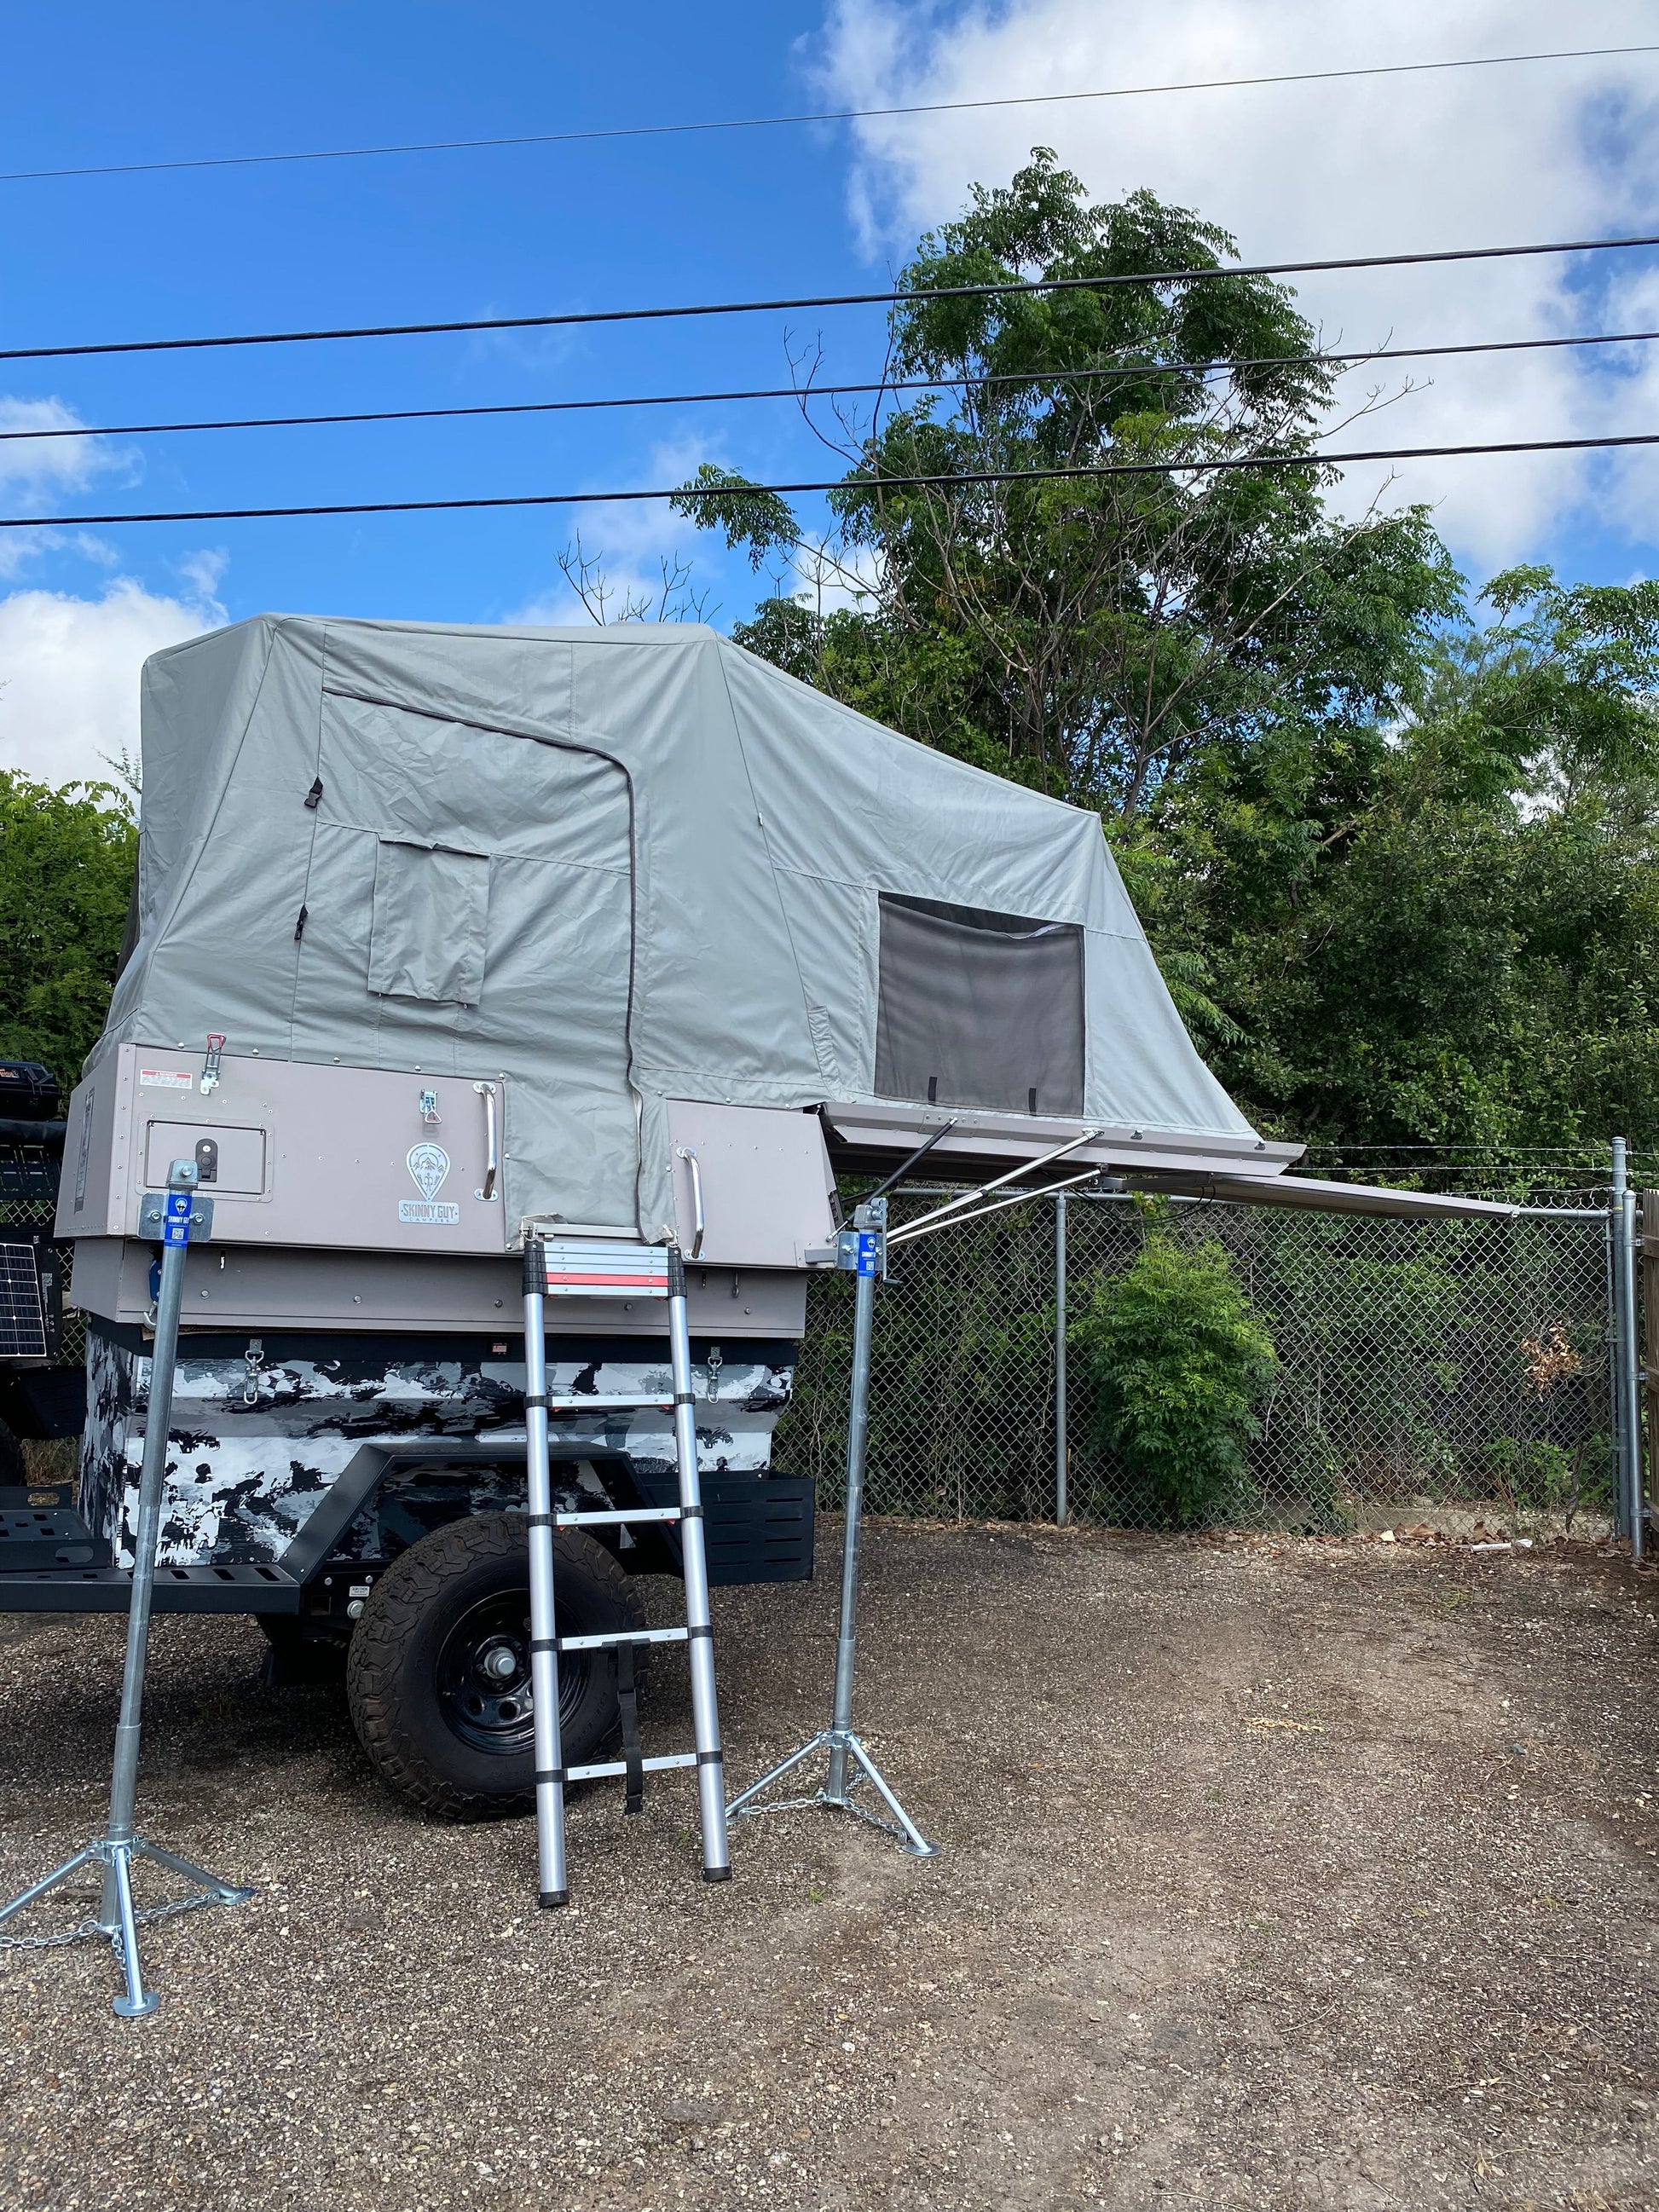 skinny guy truck bed all weather campers kit n kaboodle with outdoor kitchen and solar for sale near san marcos texas at hawkes outdoors 2102512882